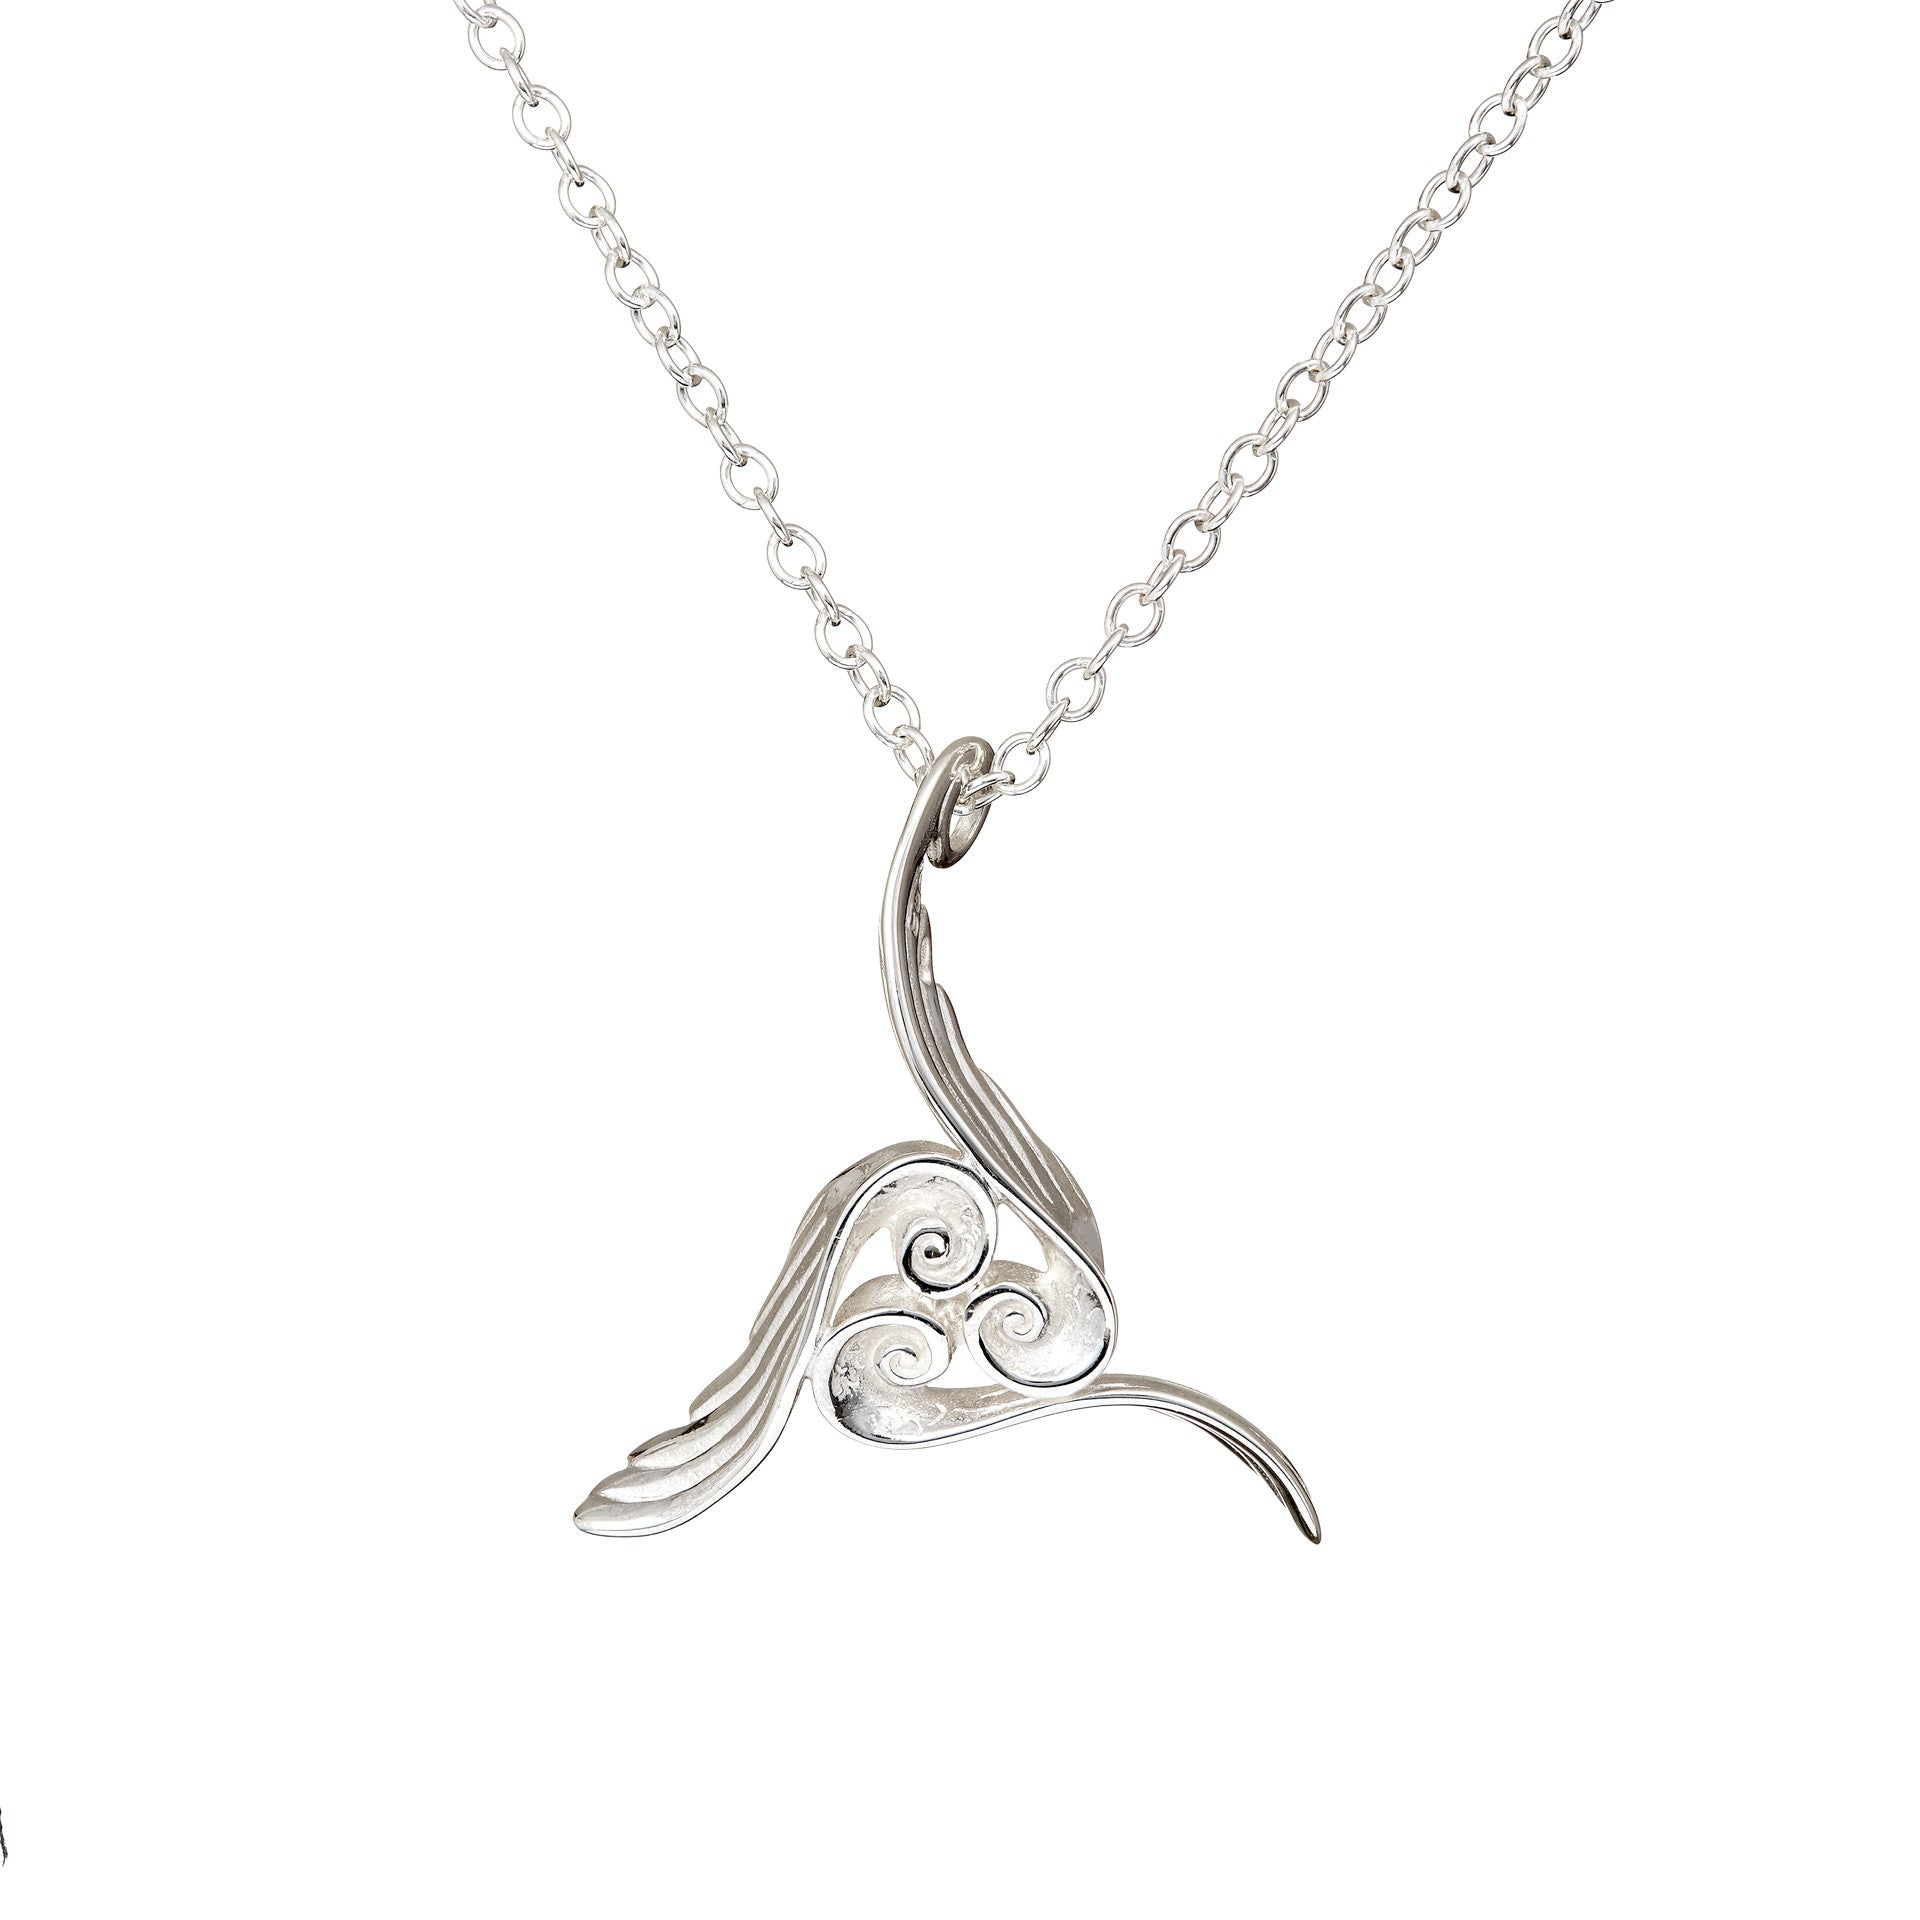 Beautiful Trinity Angel Wings, Irish Sterling Silver Angel Jewellery inspired by Celtic design, a special gift for a loved one! Part of Elena Brennan's My Angel jewellery collection.